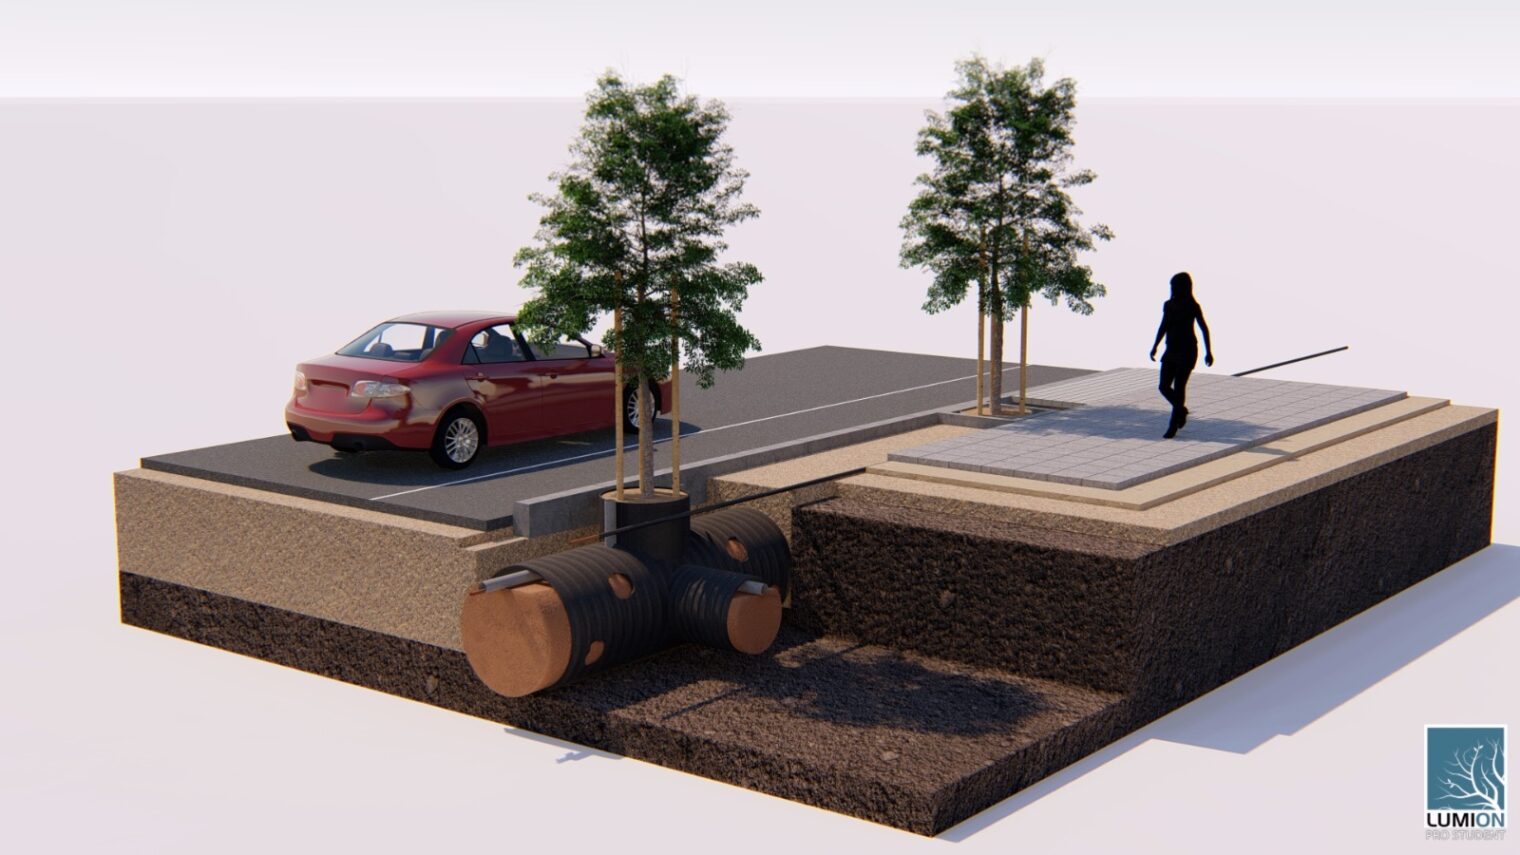 TreeTube develops and distributes innovative products and solutions for urban greening. Photo courtesy of FrizWeed